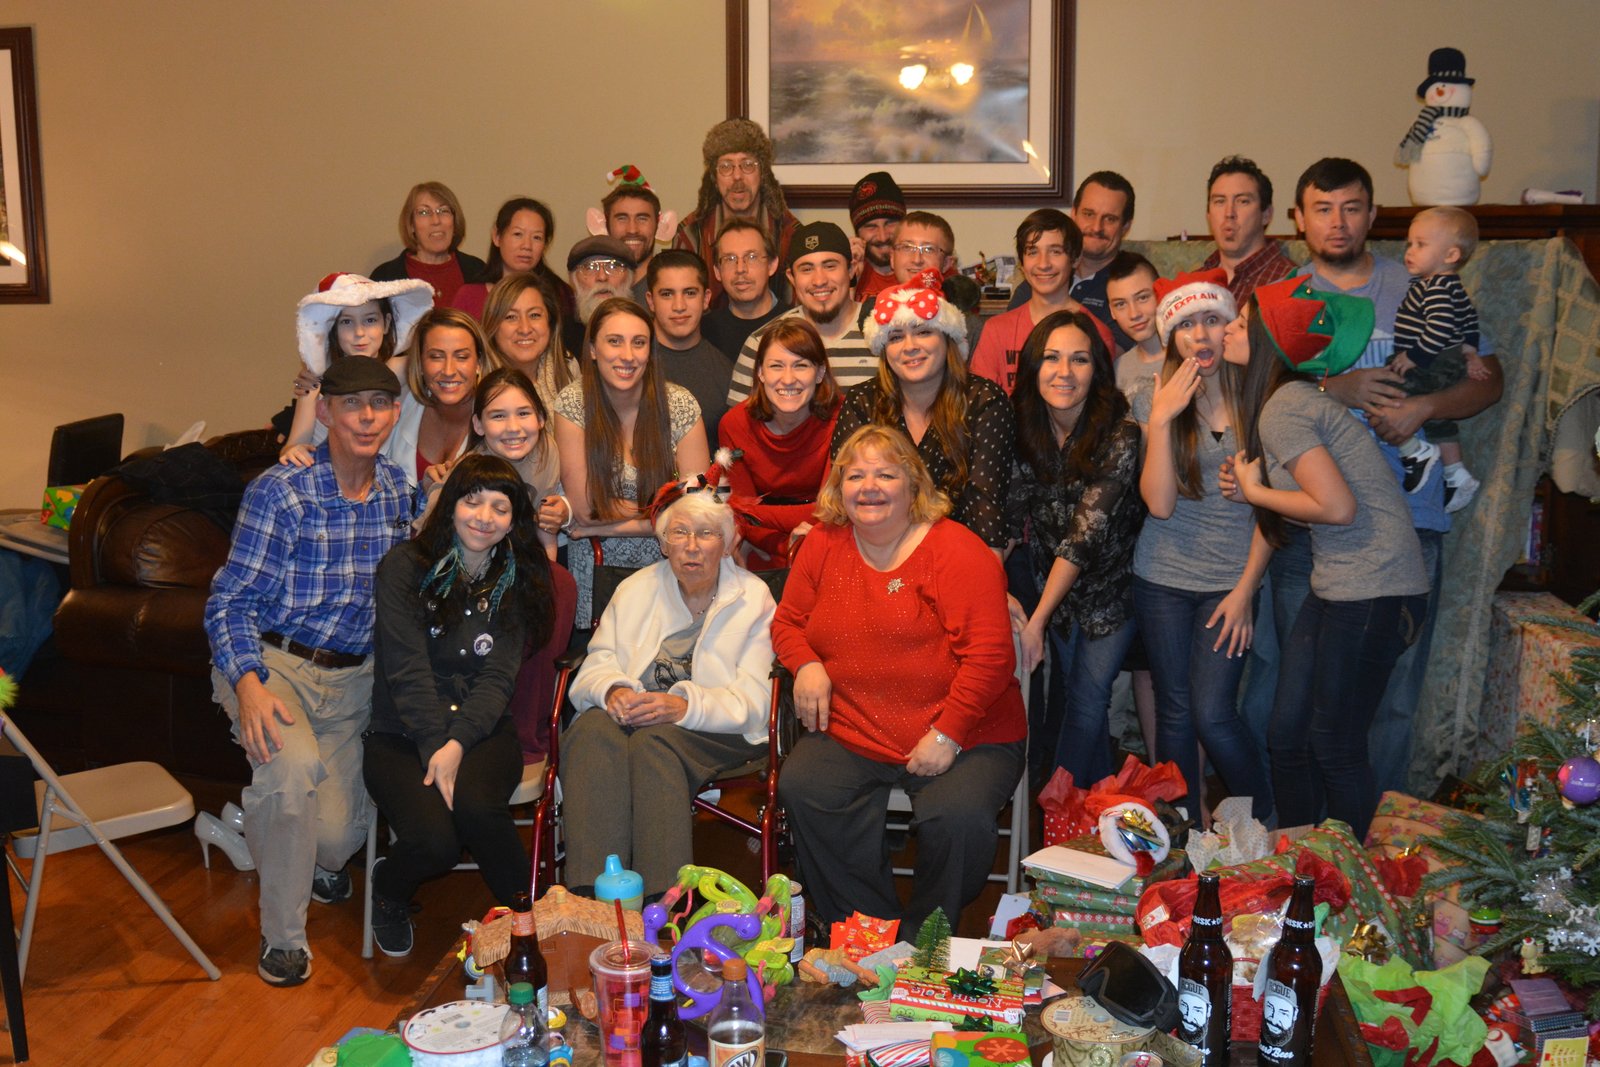 The Charest Family reunion, Christmas 2014